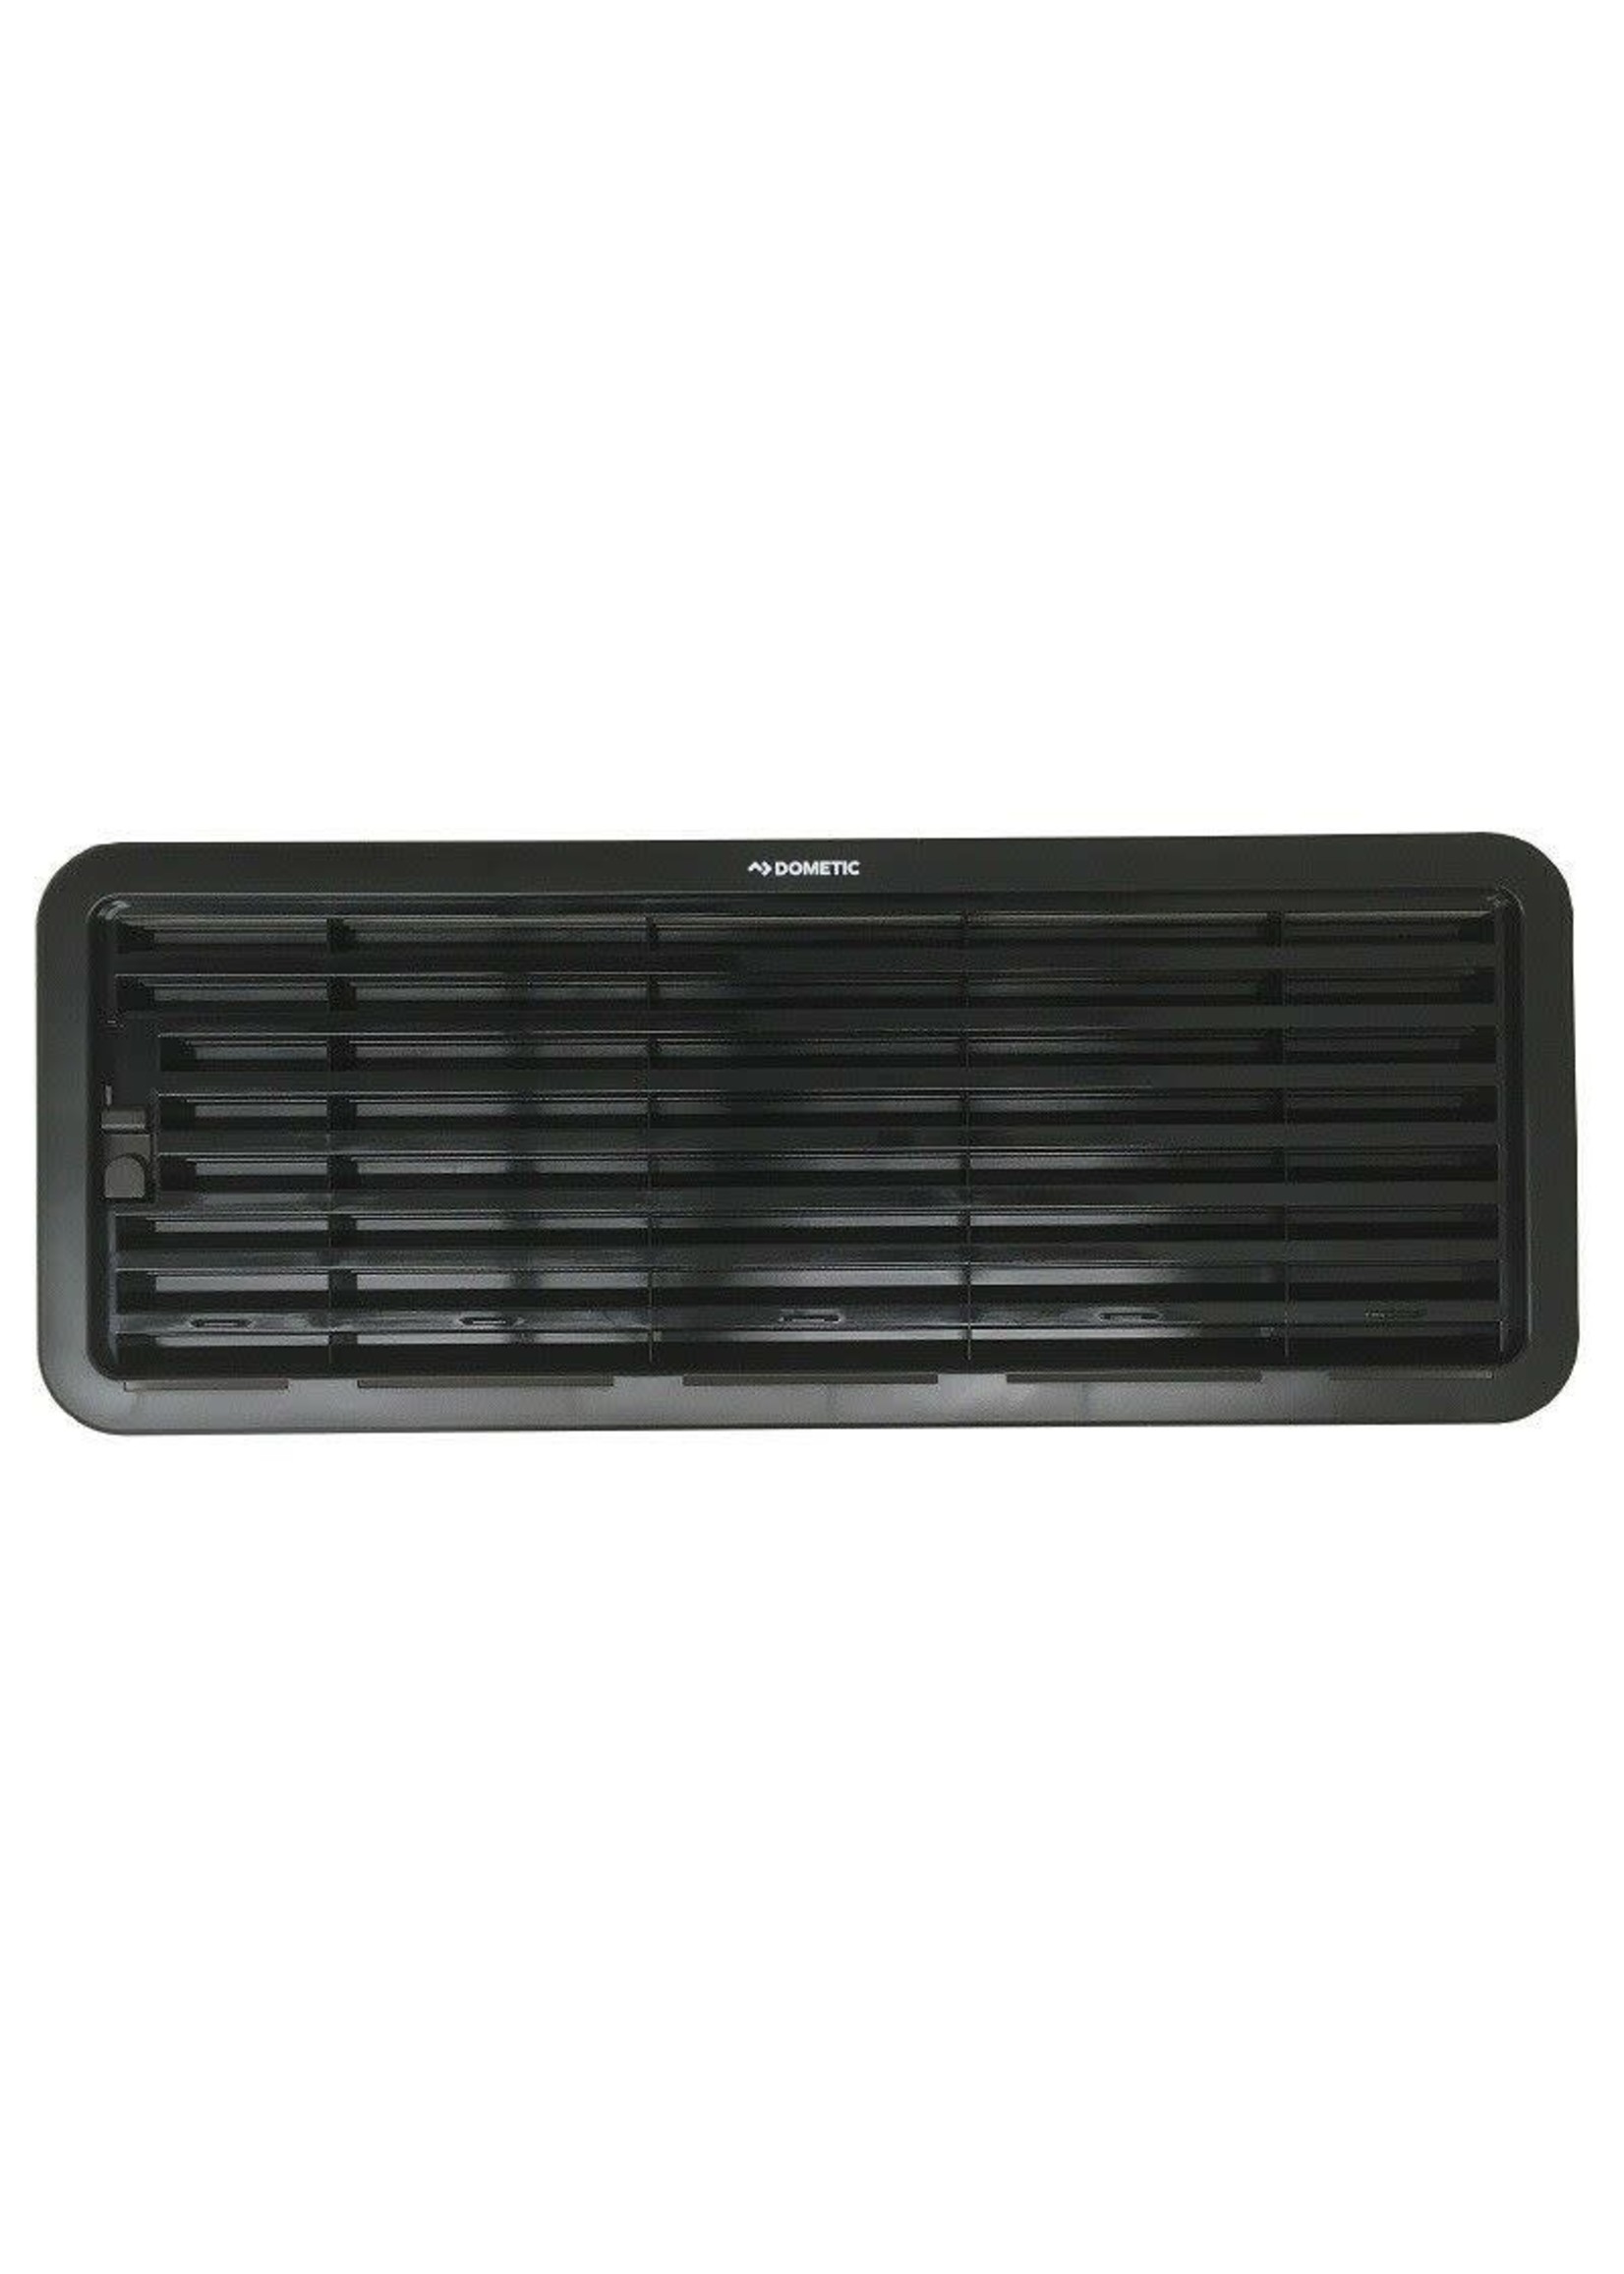 DOMETIC AS1635 lower vent - black